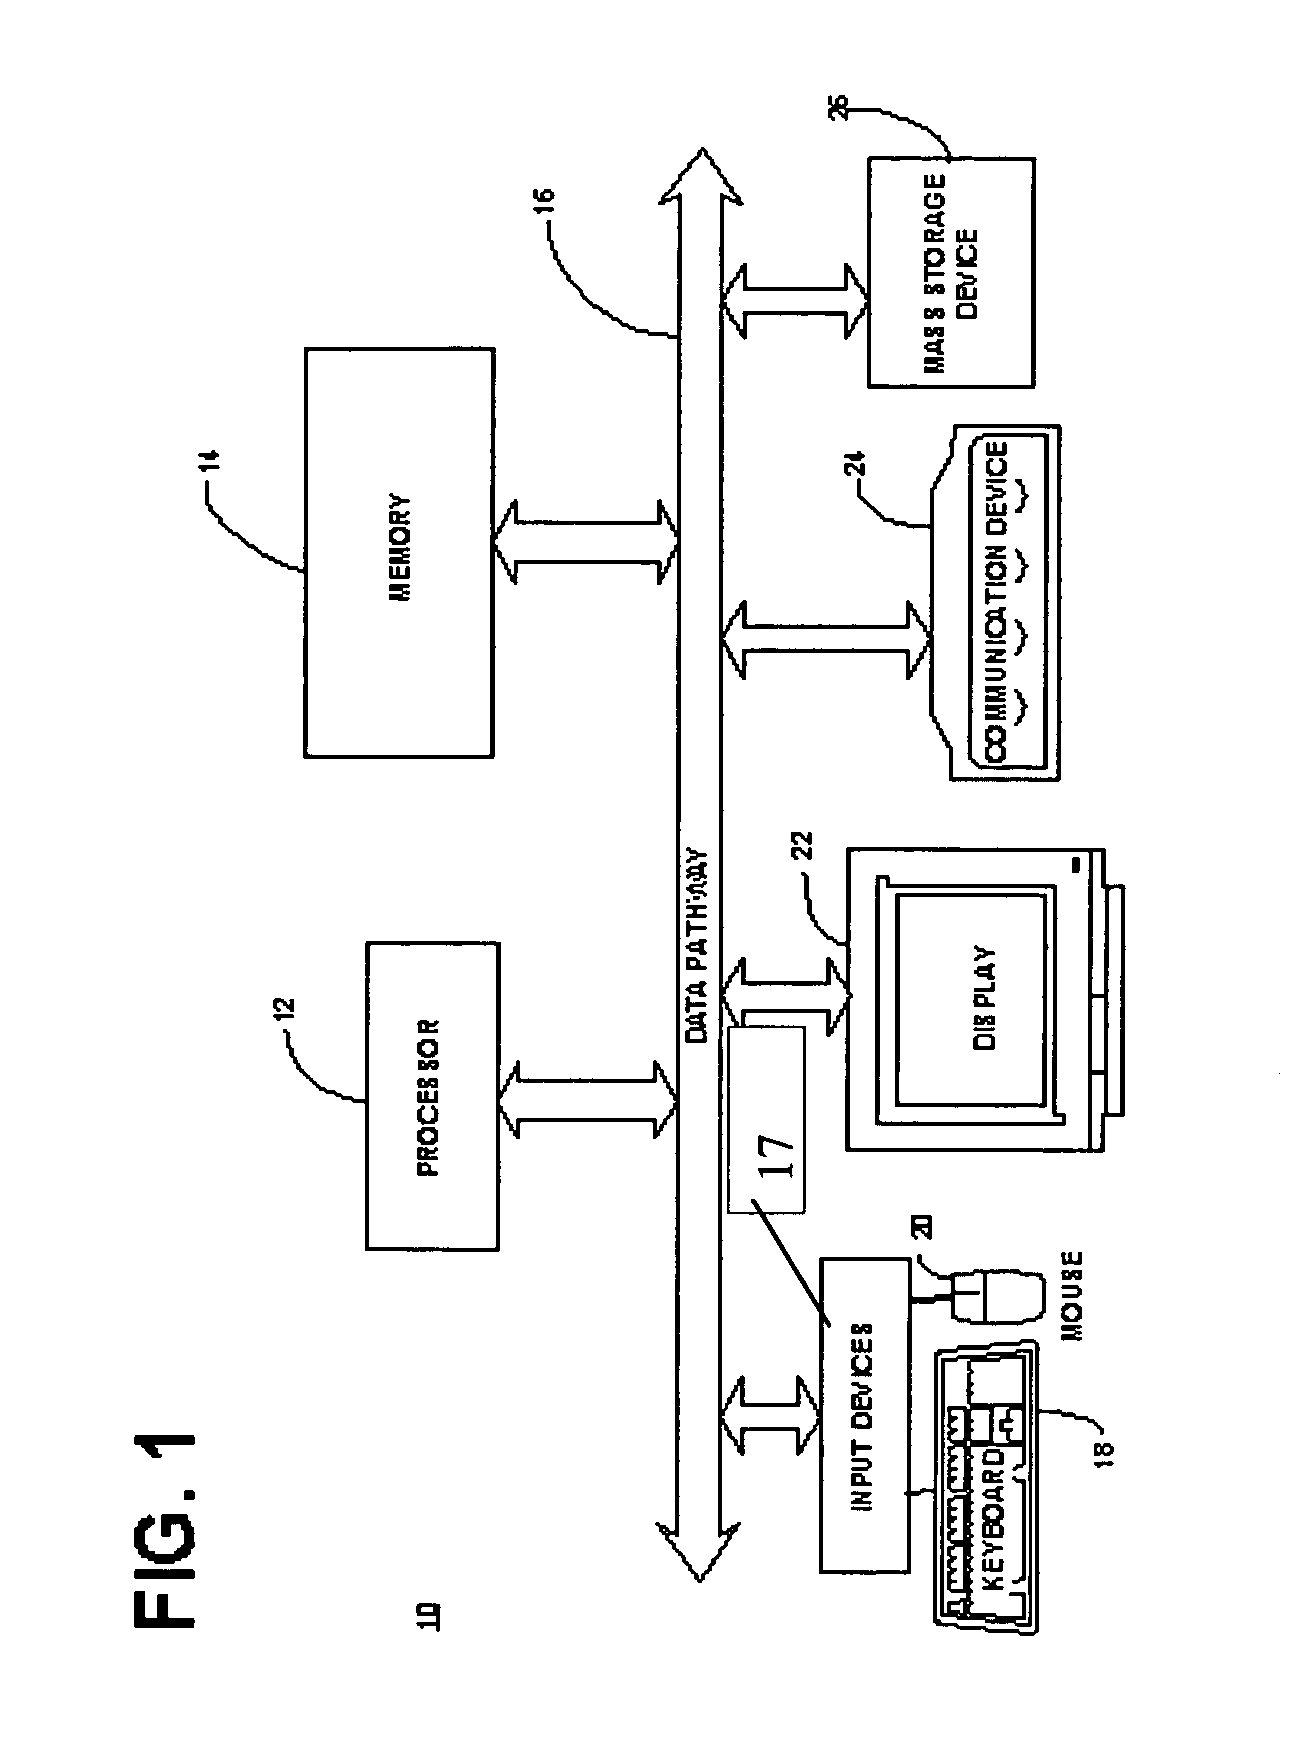 Method and system for detecting business behavioral patterns related to a business entity